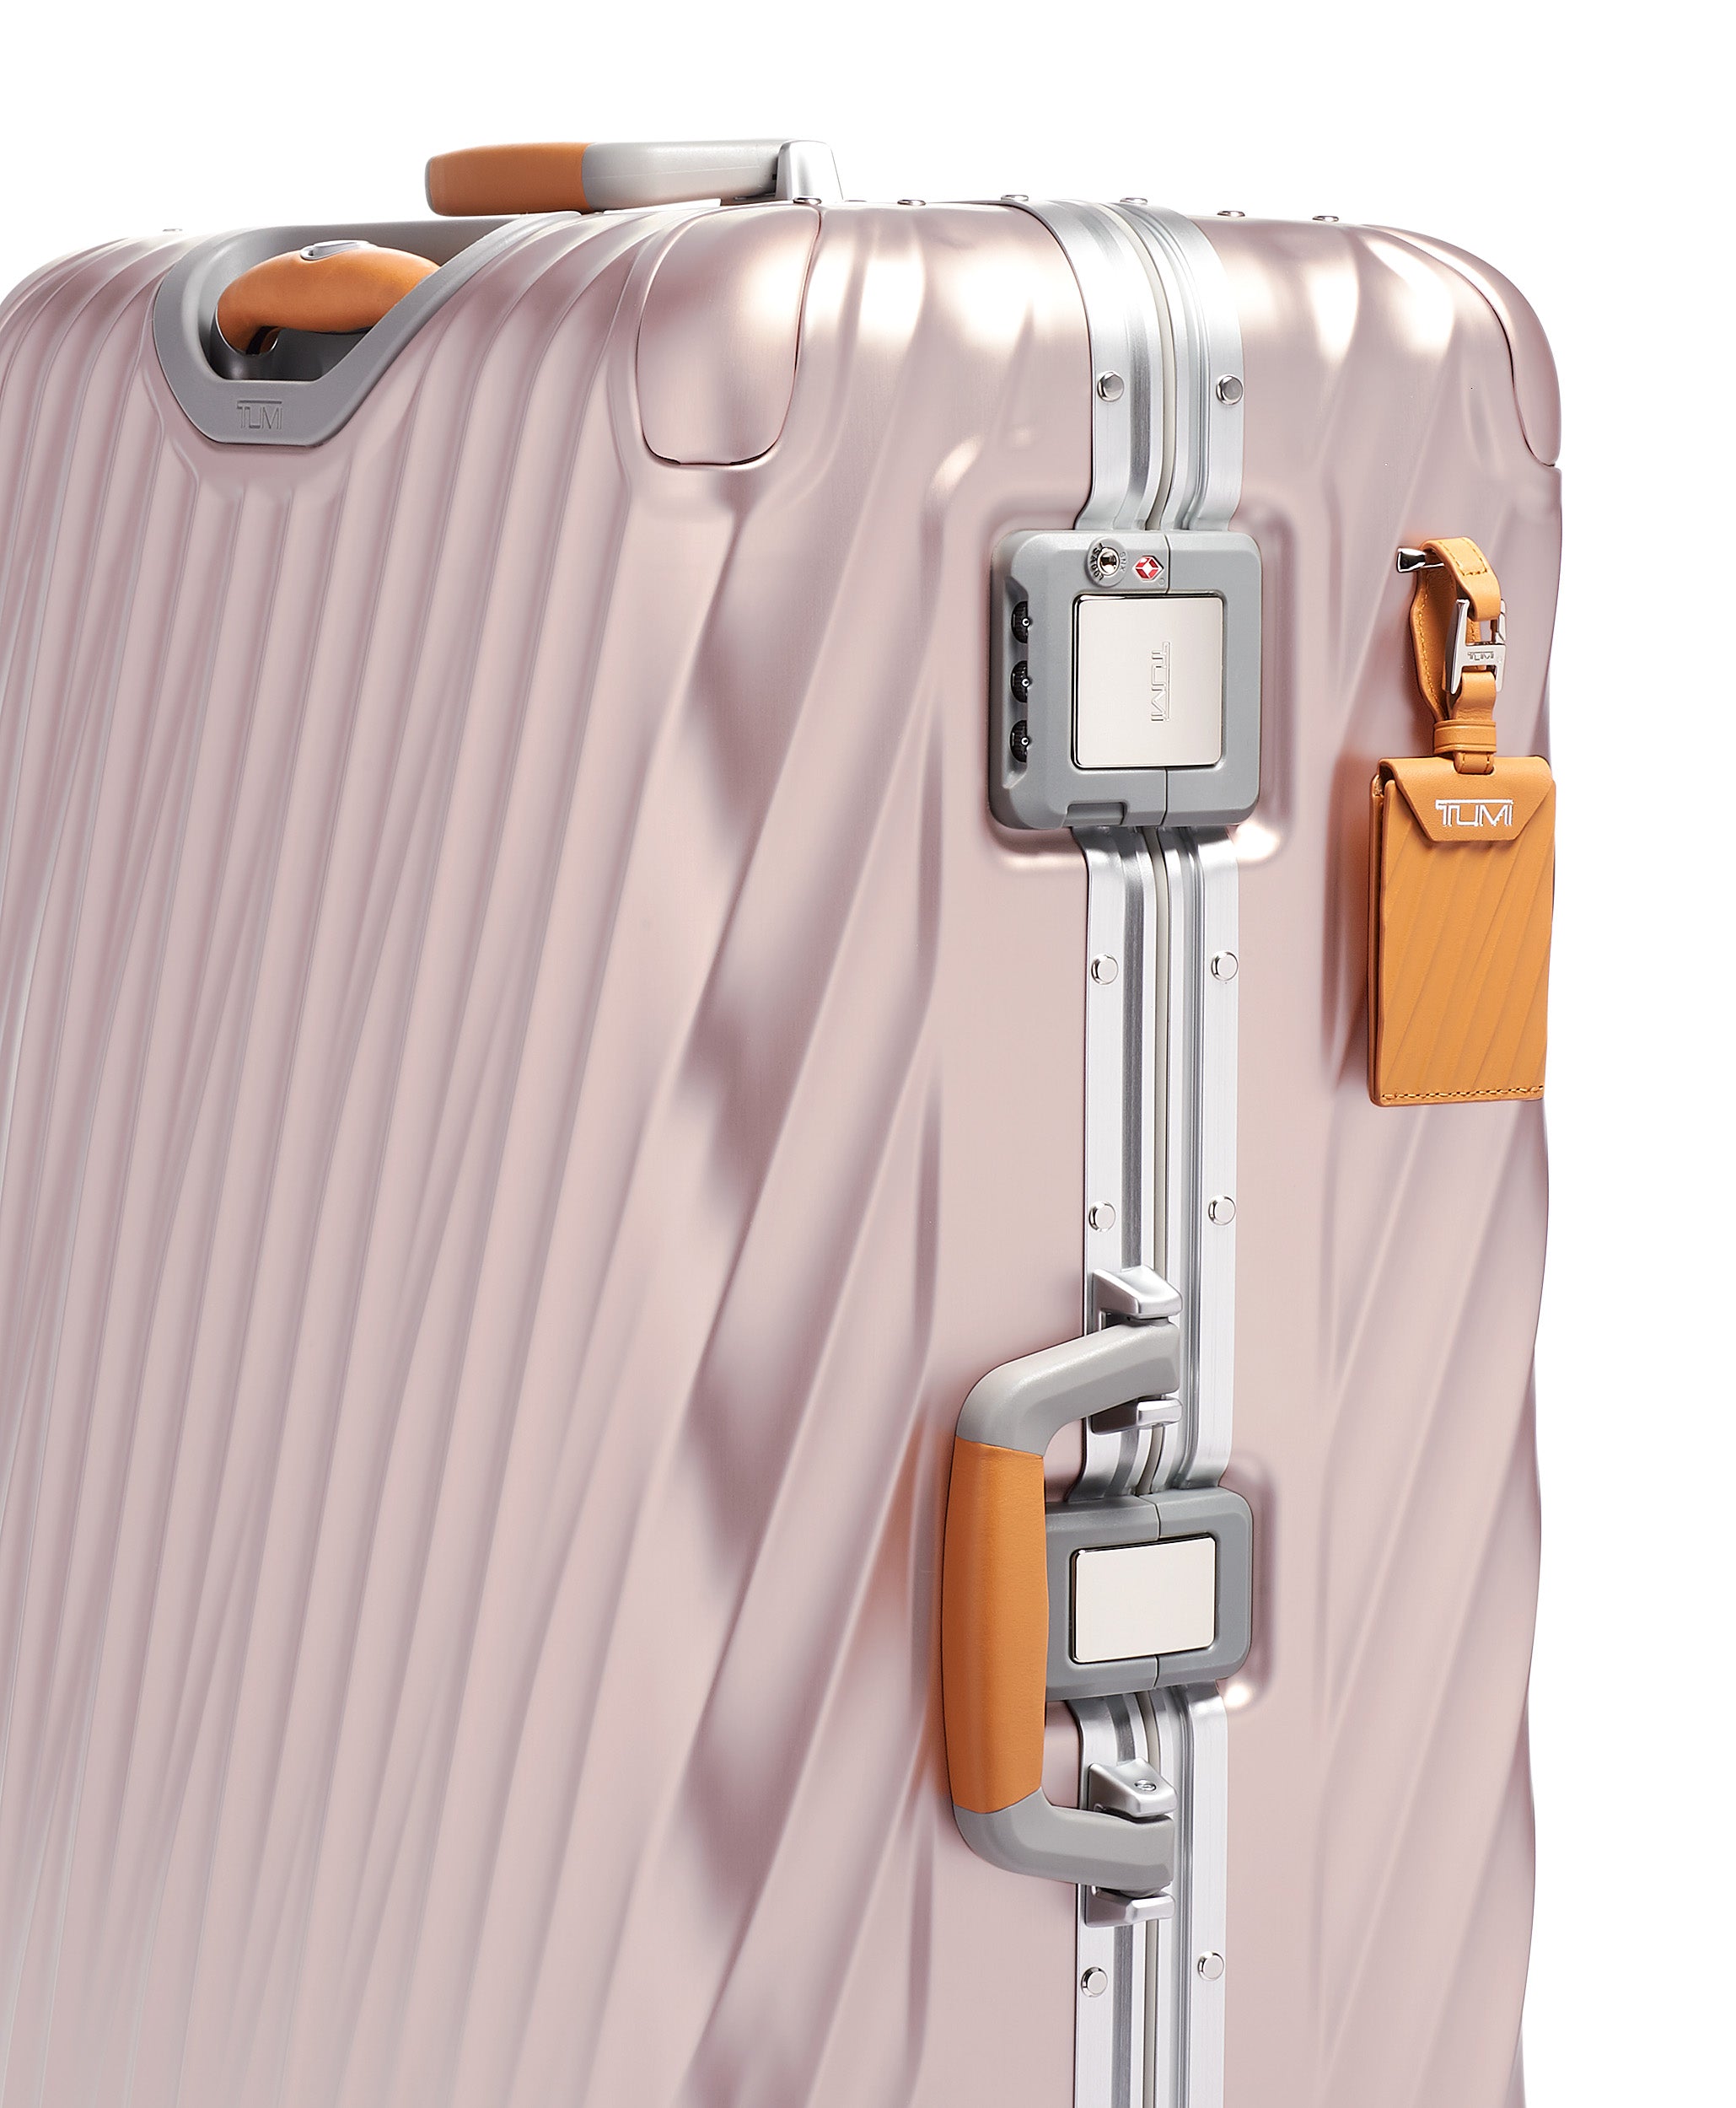 Tumi 19 Degree Aluminum Extended Trip Packing Case - Silver